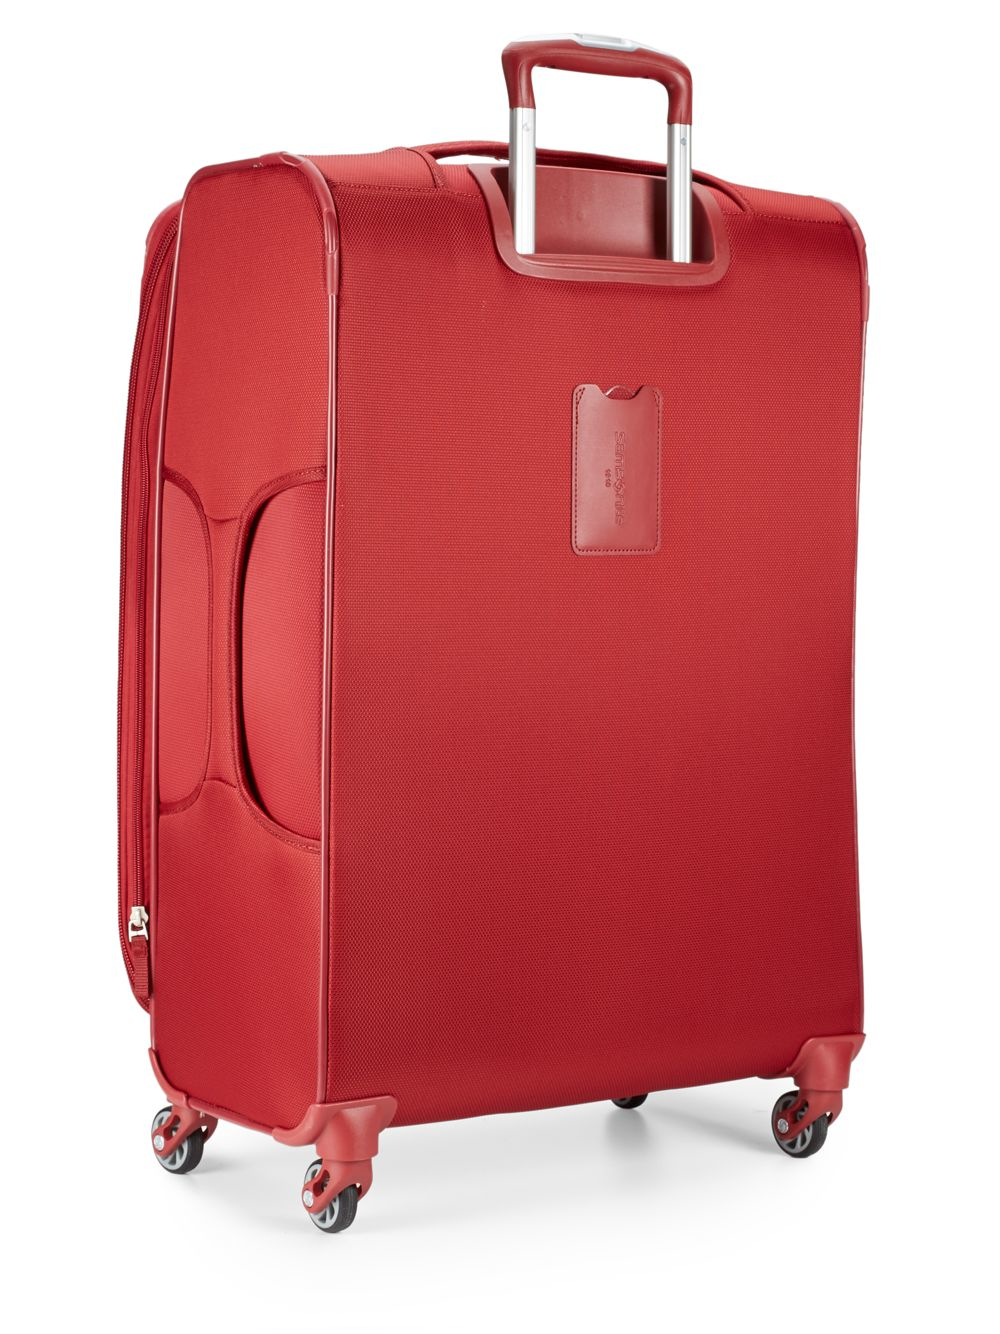 Samsonite 25-inch Red Spinner Suitcase in Red for Men - Lyst